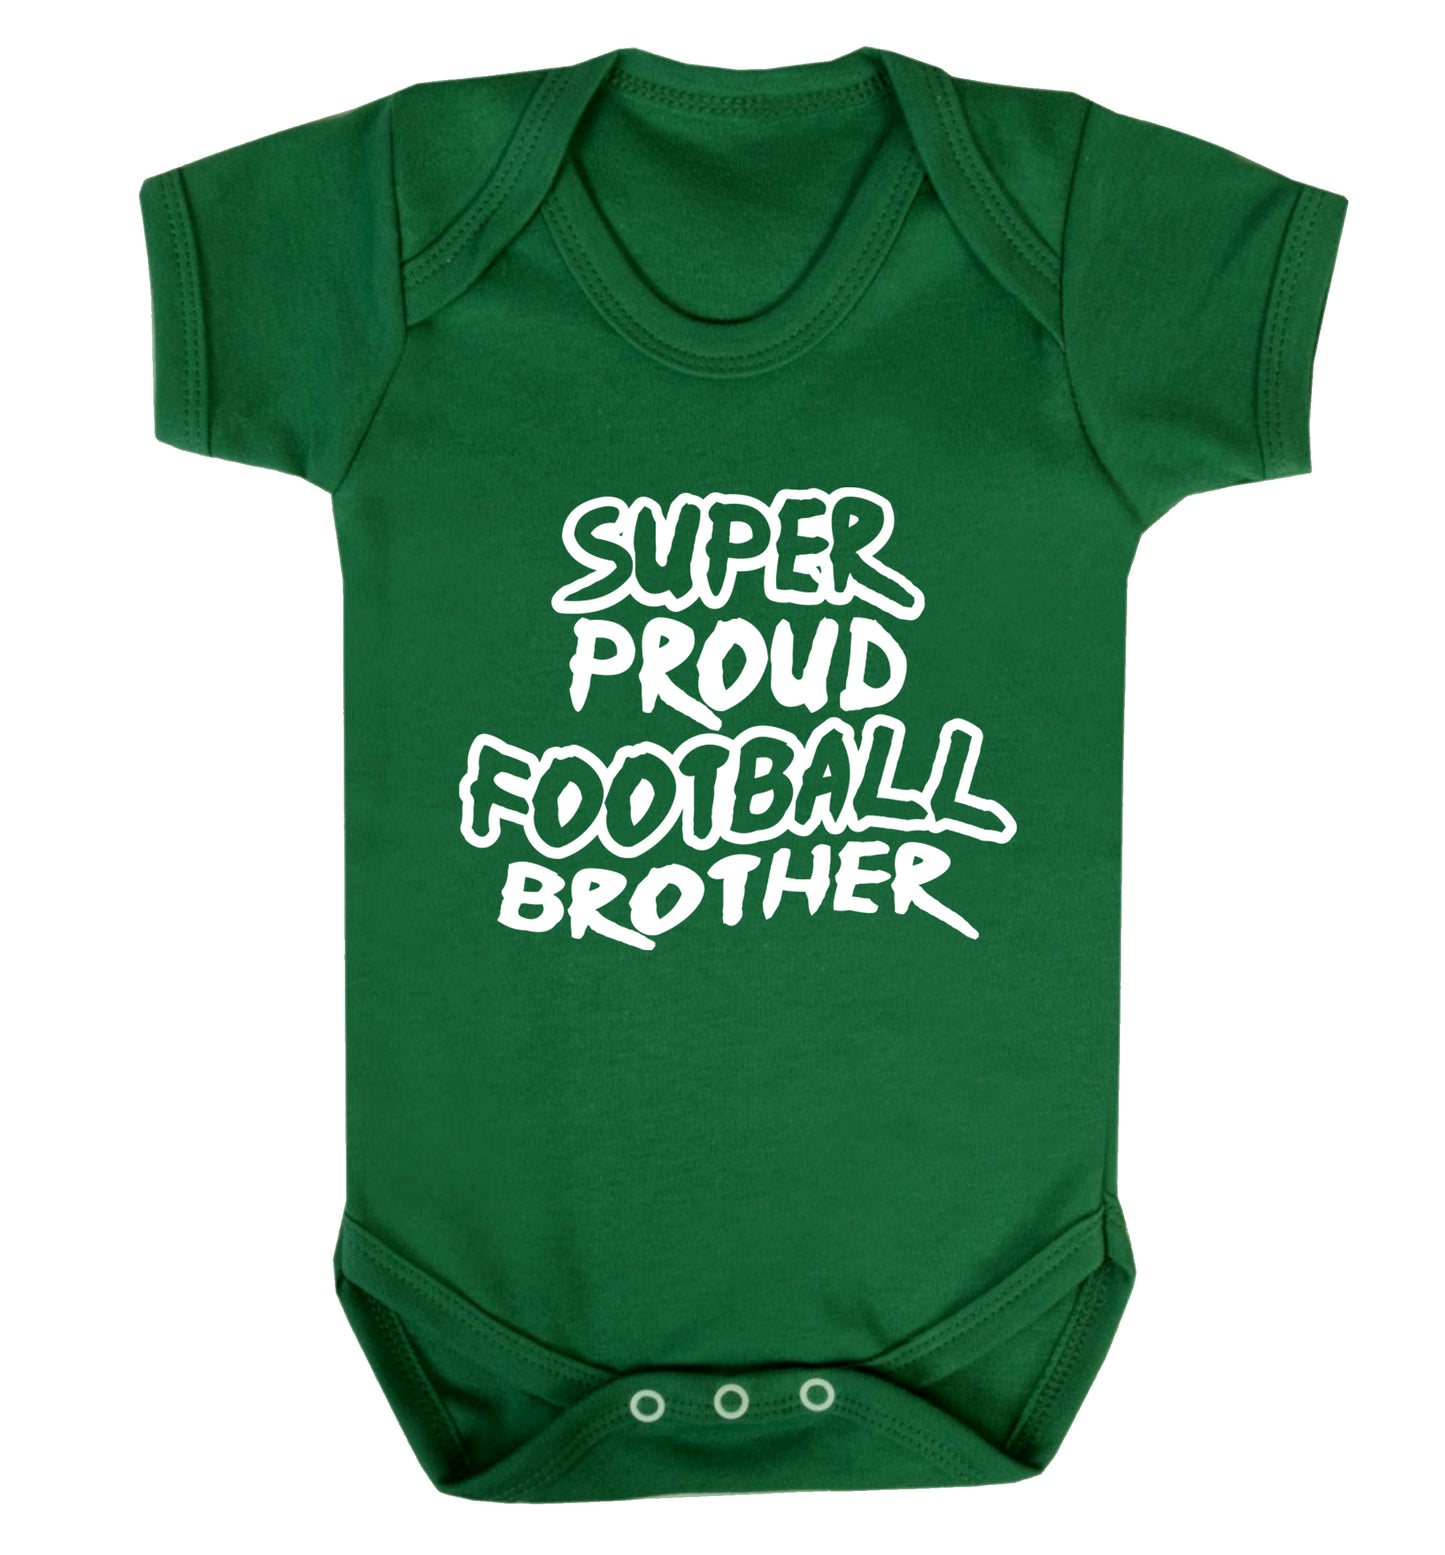 Super proud football brother Baby Vest green 18-24 months